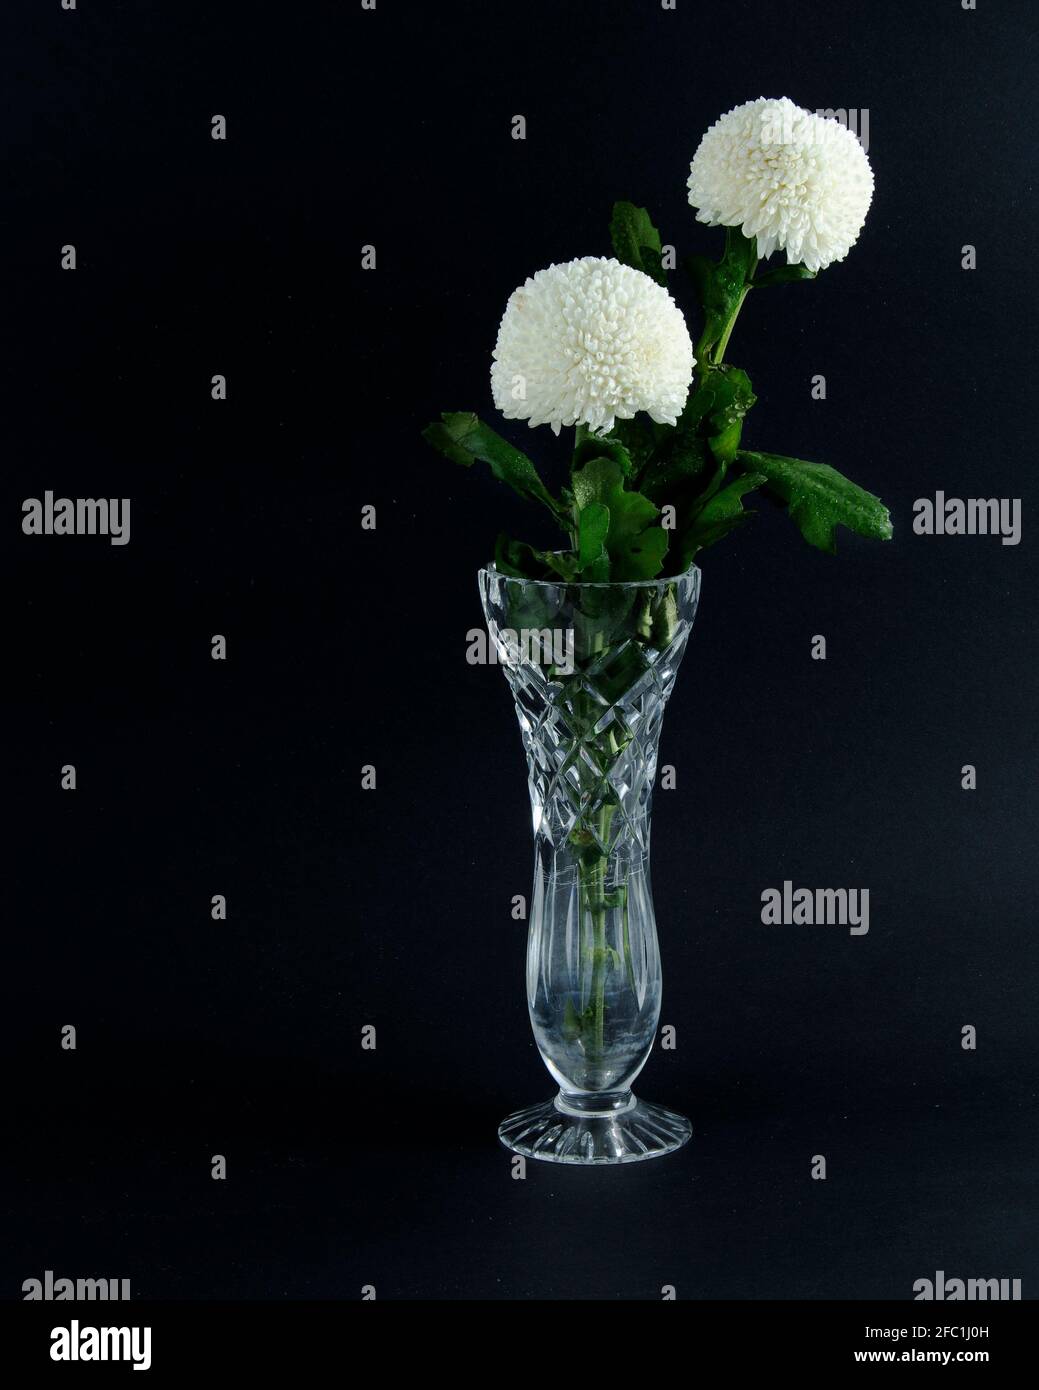 Two solitary pretty white Pom Pom Mums Chrysanthemum flowers in a crystal vase closeup on black background. Beauty in nature image. Stock Photo